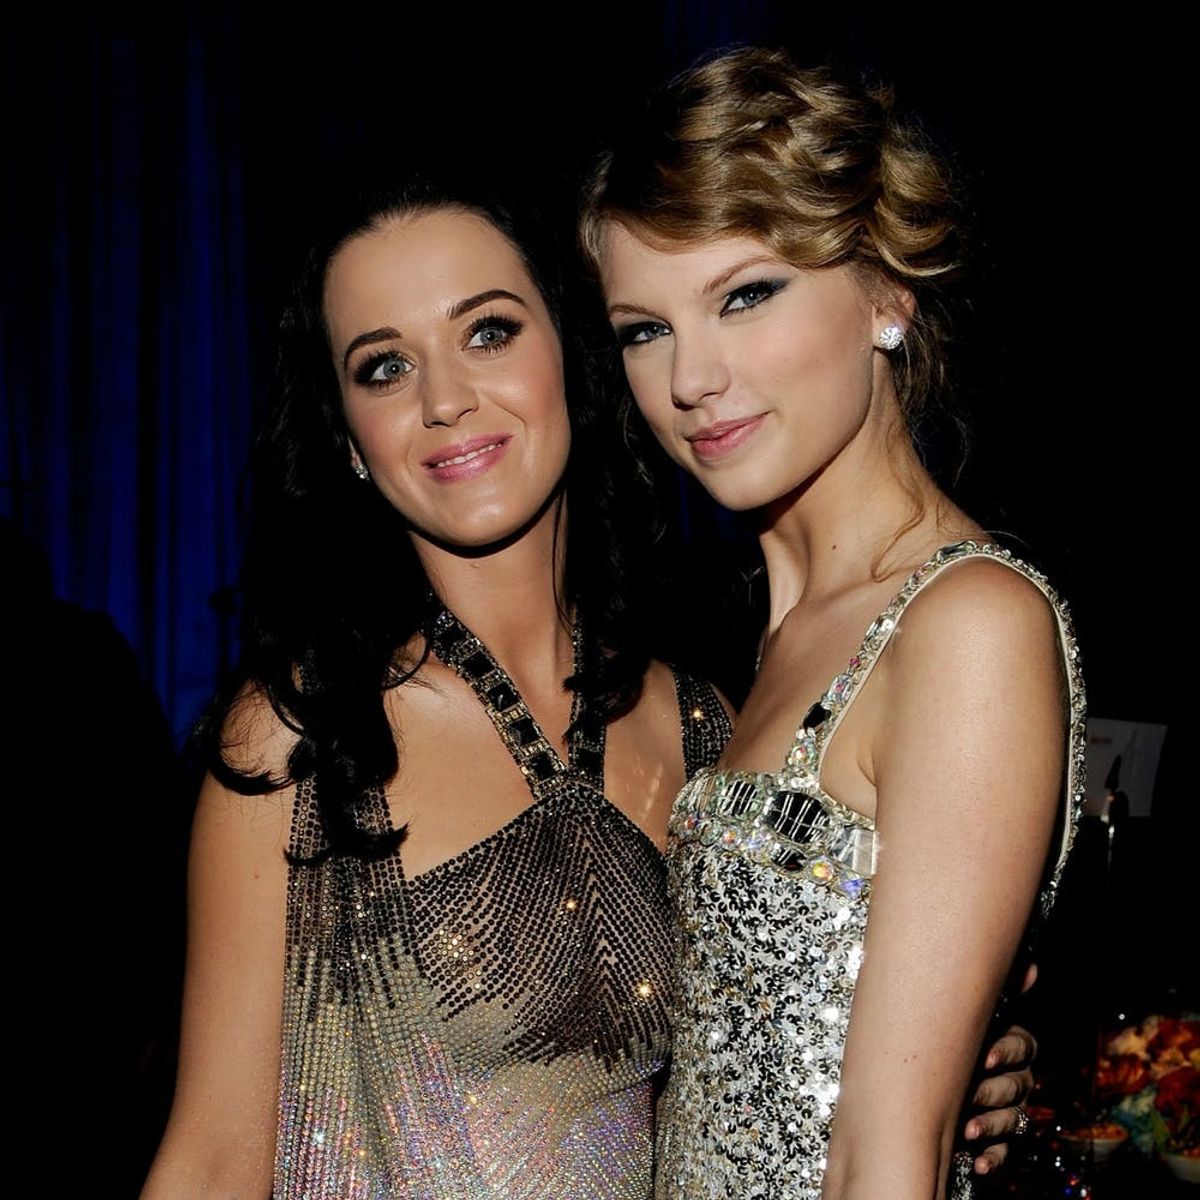 This Is the One Thing Katy Perry Says Could Make Her Collaborate With Taylor Swift